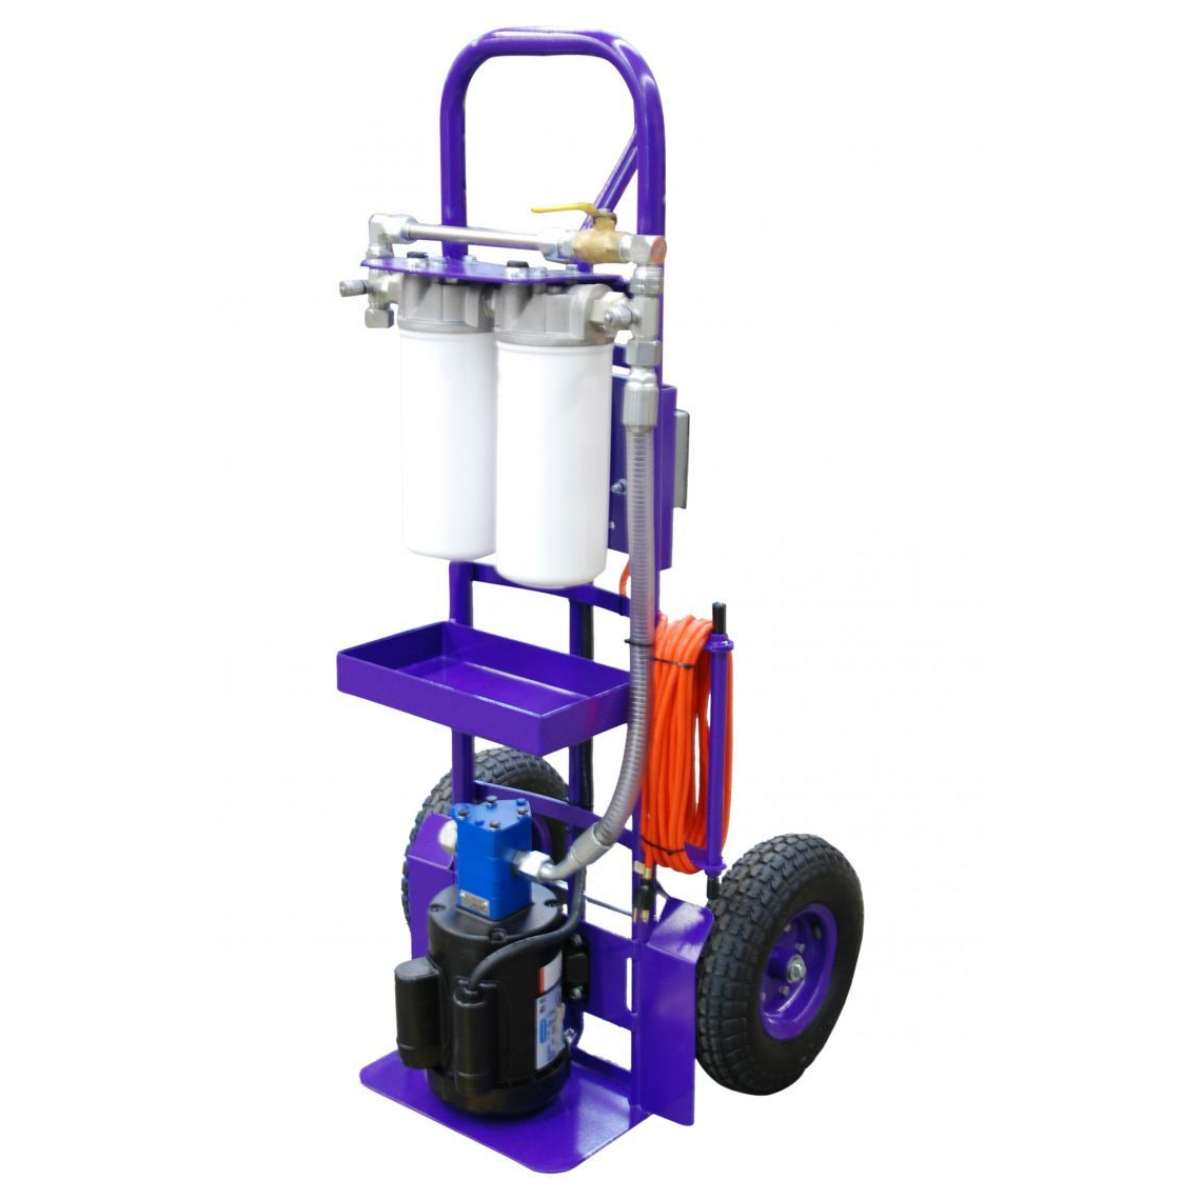 M Series Filtercart for Gear Oil 1HP 2GPM